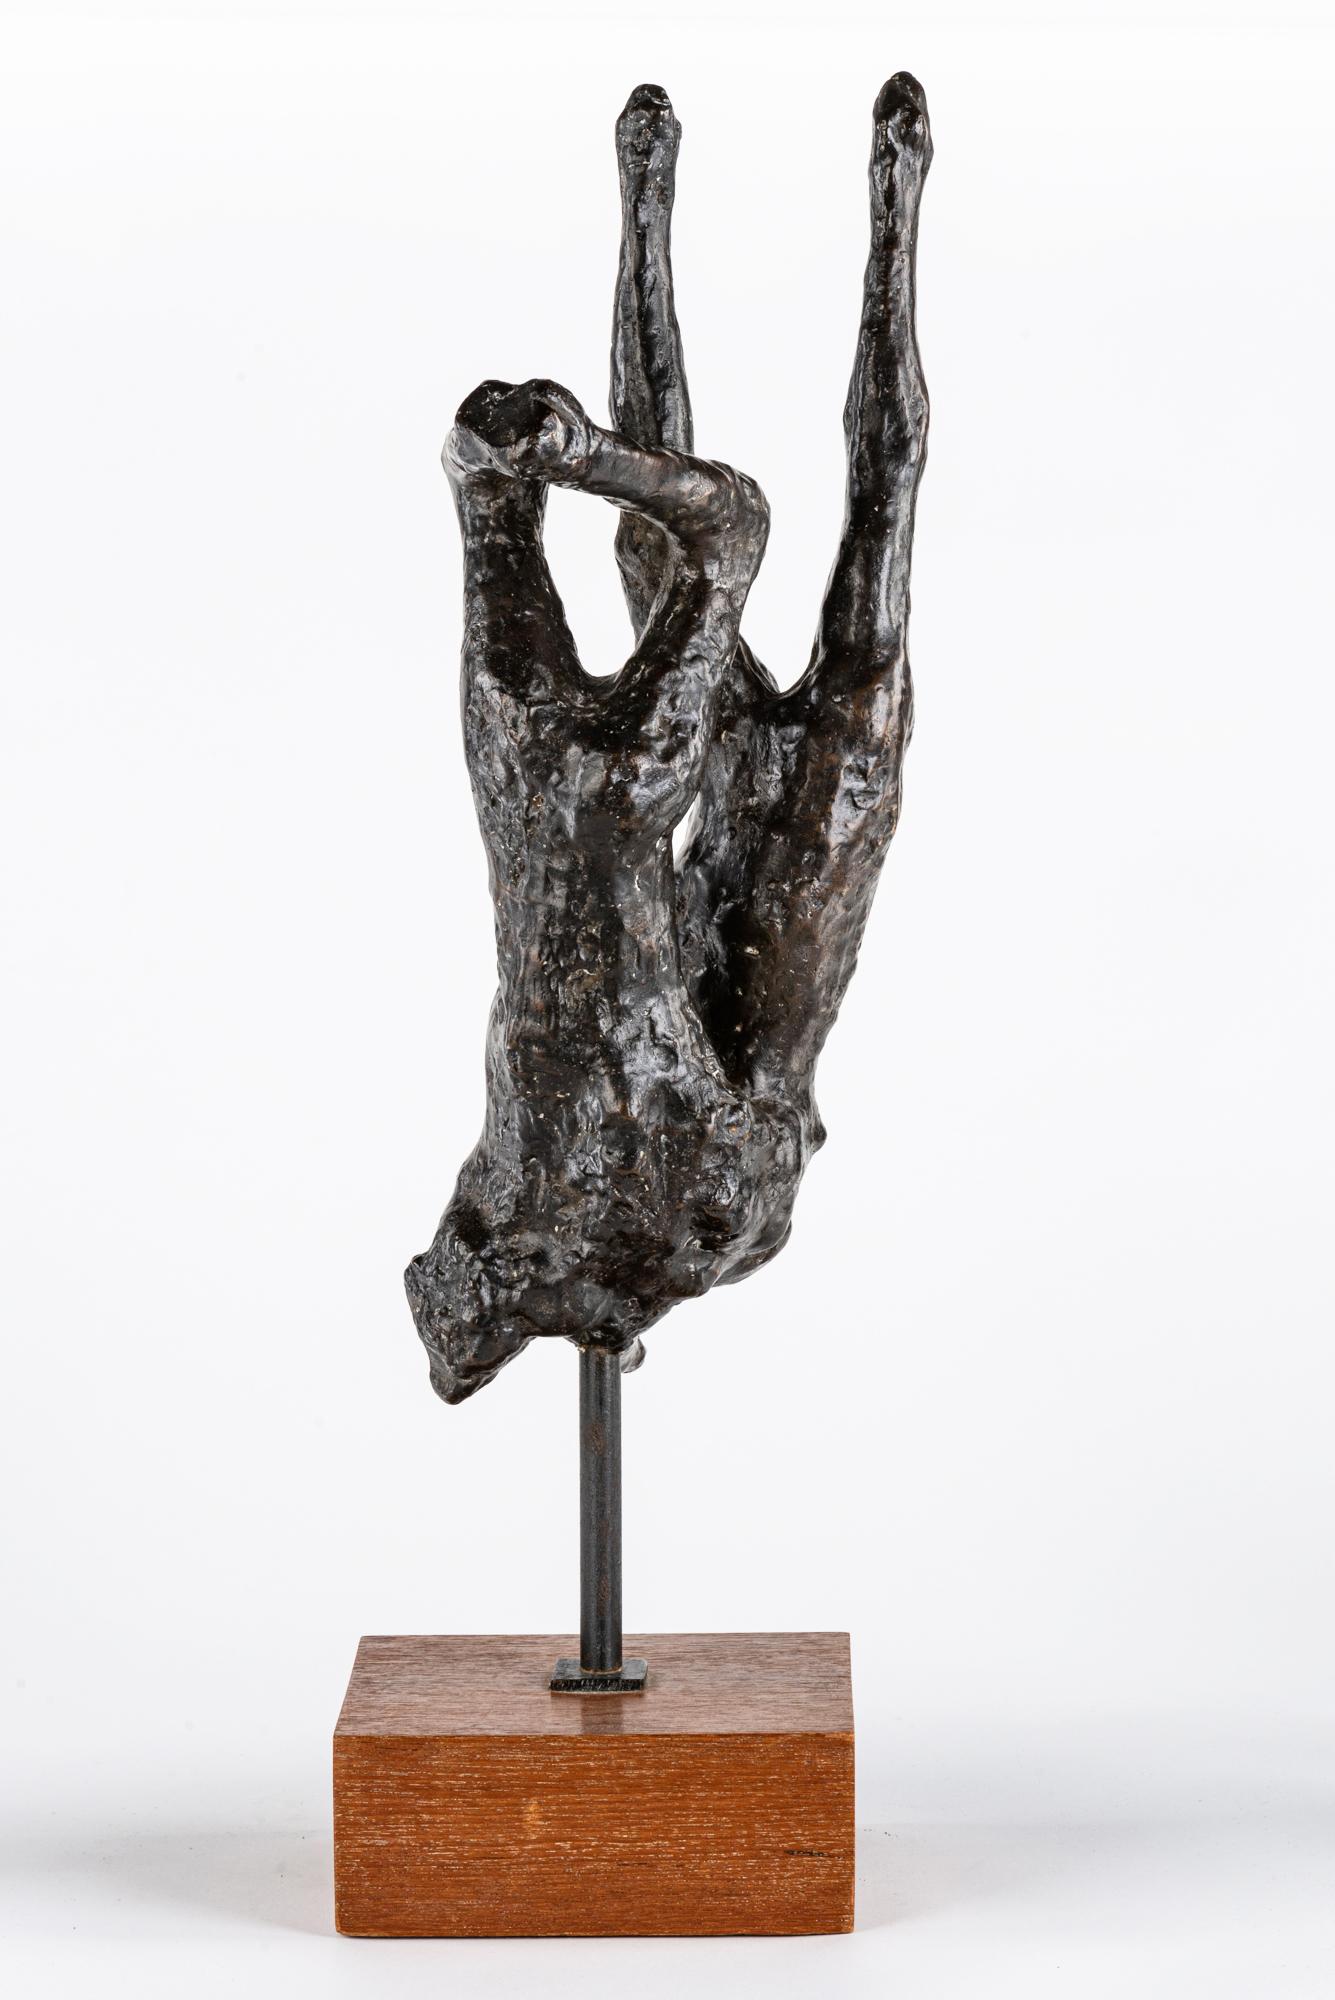 Height including plinth 54.00cm [21.25 inches]

Bronze
Date 1959 / 1960
1 of an edition of 8

PROVENANCE
A private collection

LITERATURE
The Sculpture of Ralph Brown 
Illustrated page 60  Another Cast